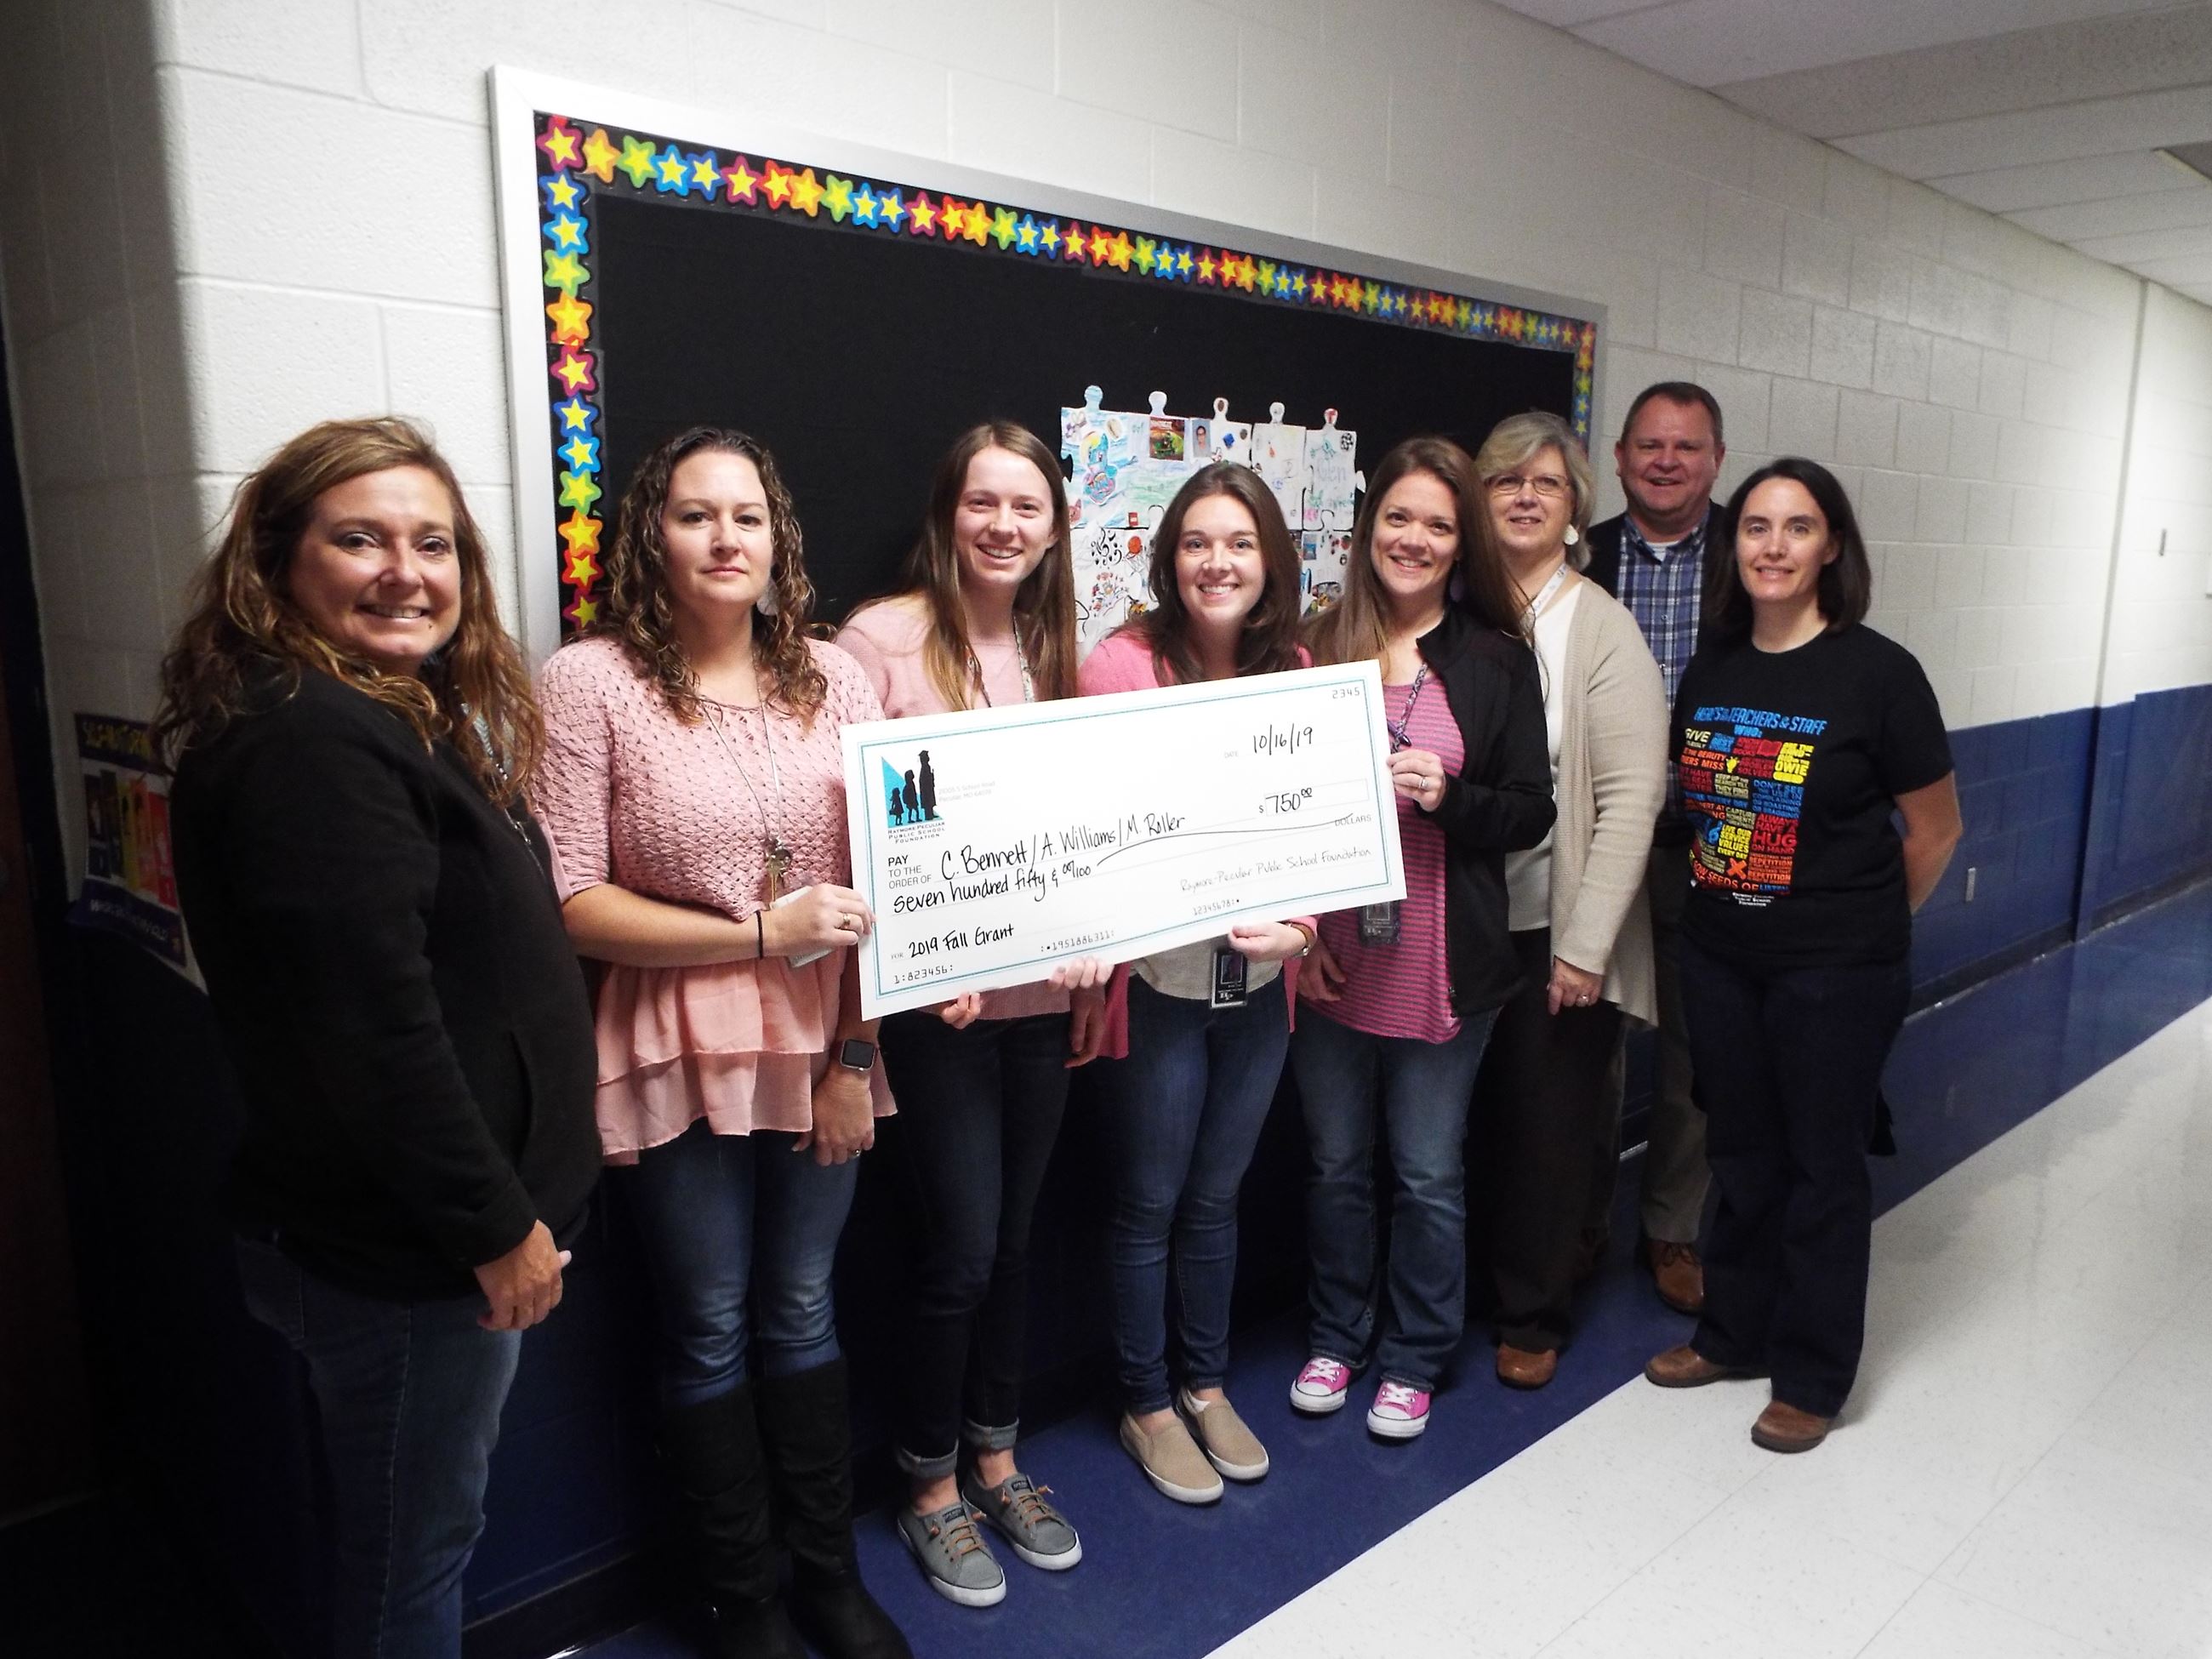 Peculiar Elementary School first grade teachers Colleen Bennett, Alisha Williams, and Monica Roller received a grant of $750 to purchase Bee Bots.